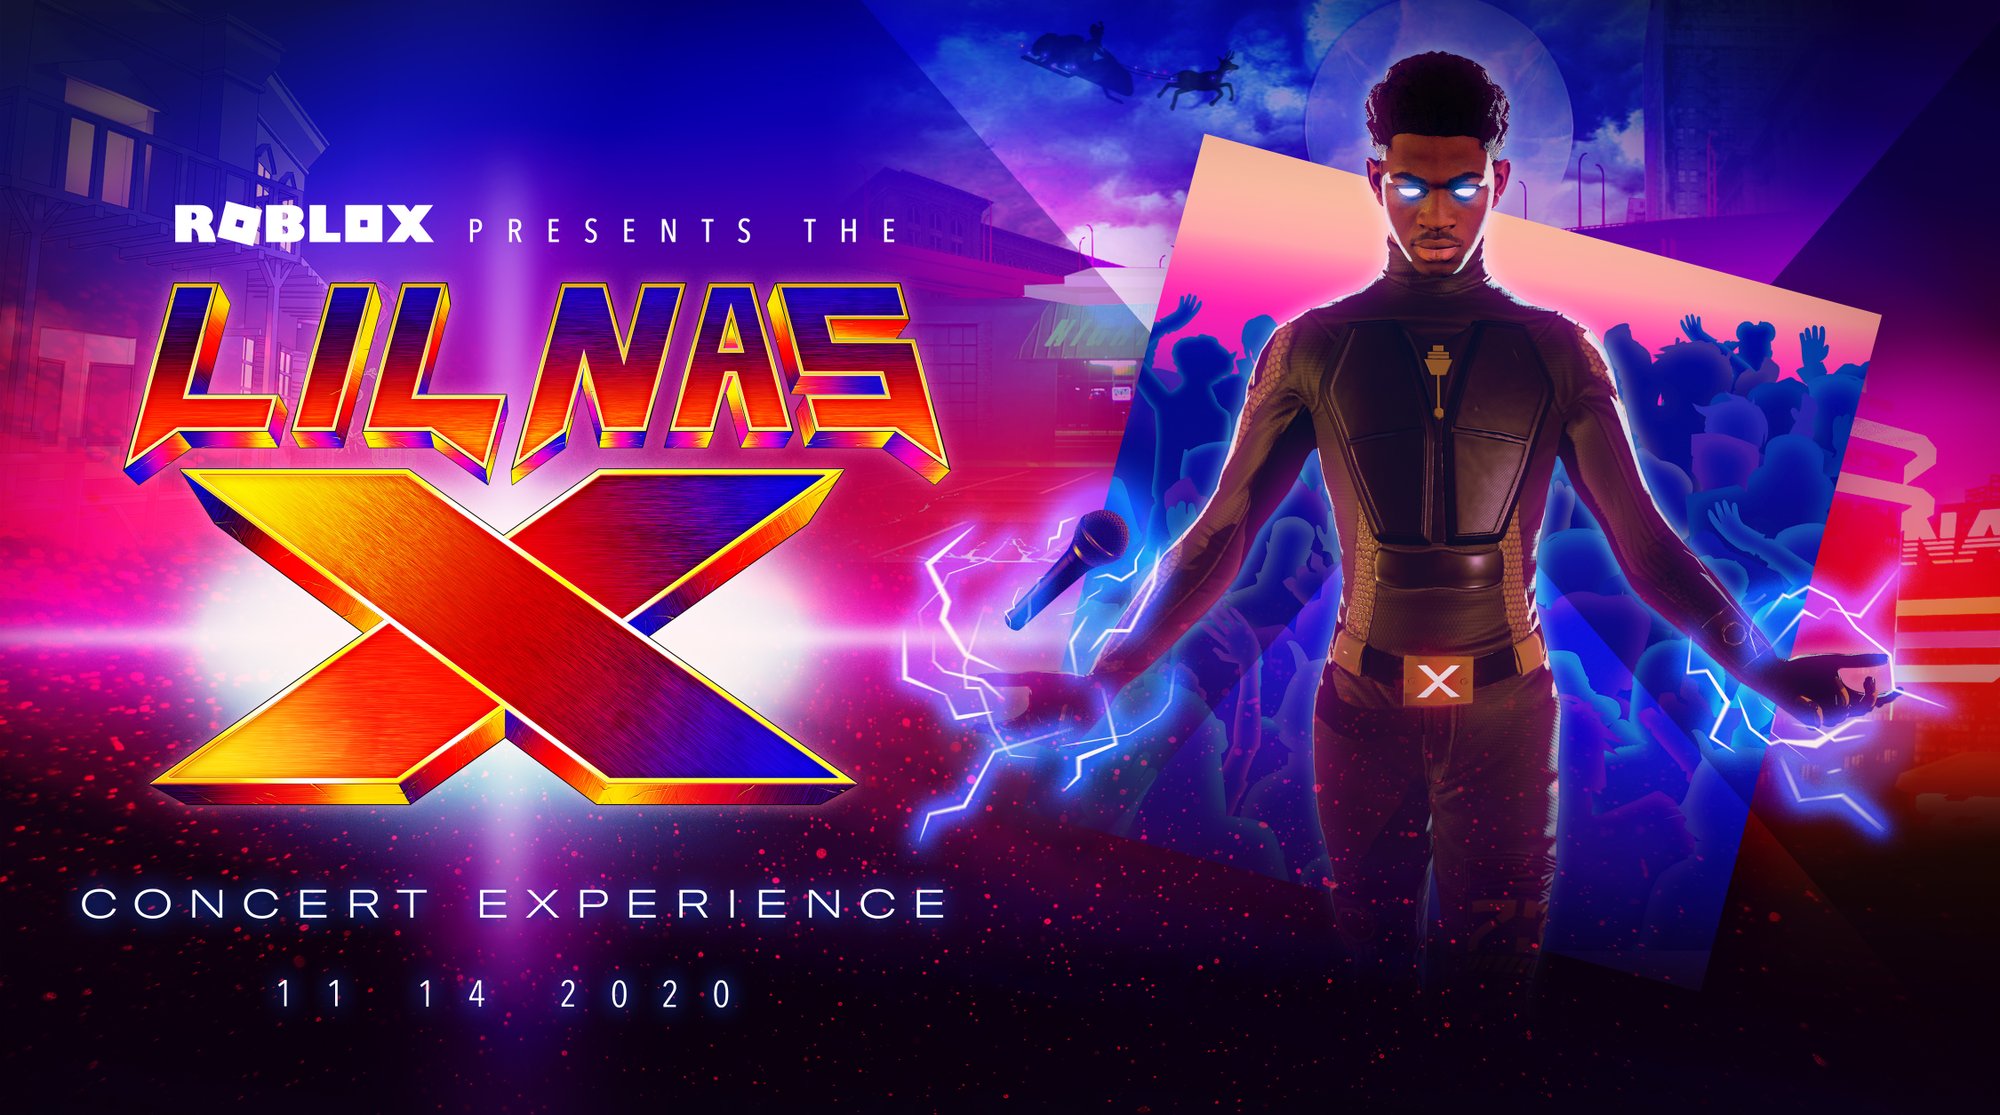 Roblox And Two Time Grammy Award Winner Lil Nas X Unite For Groundbreaking First Ever Virtual Concert On The Platform - two time roblox